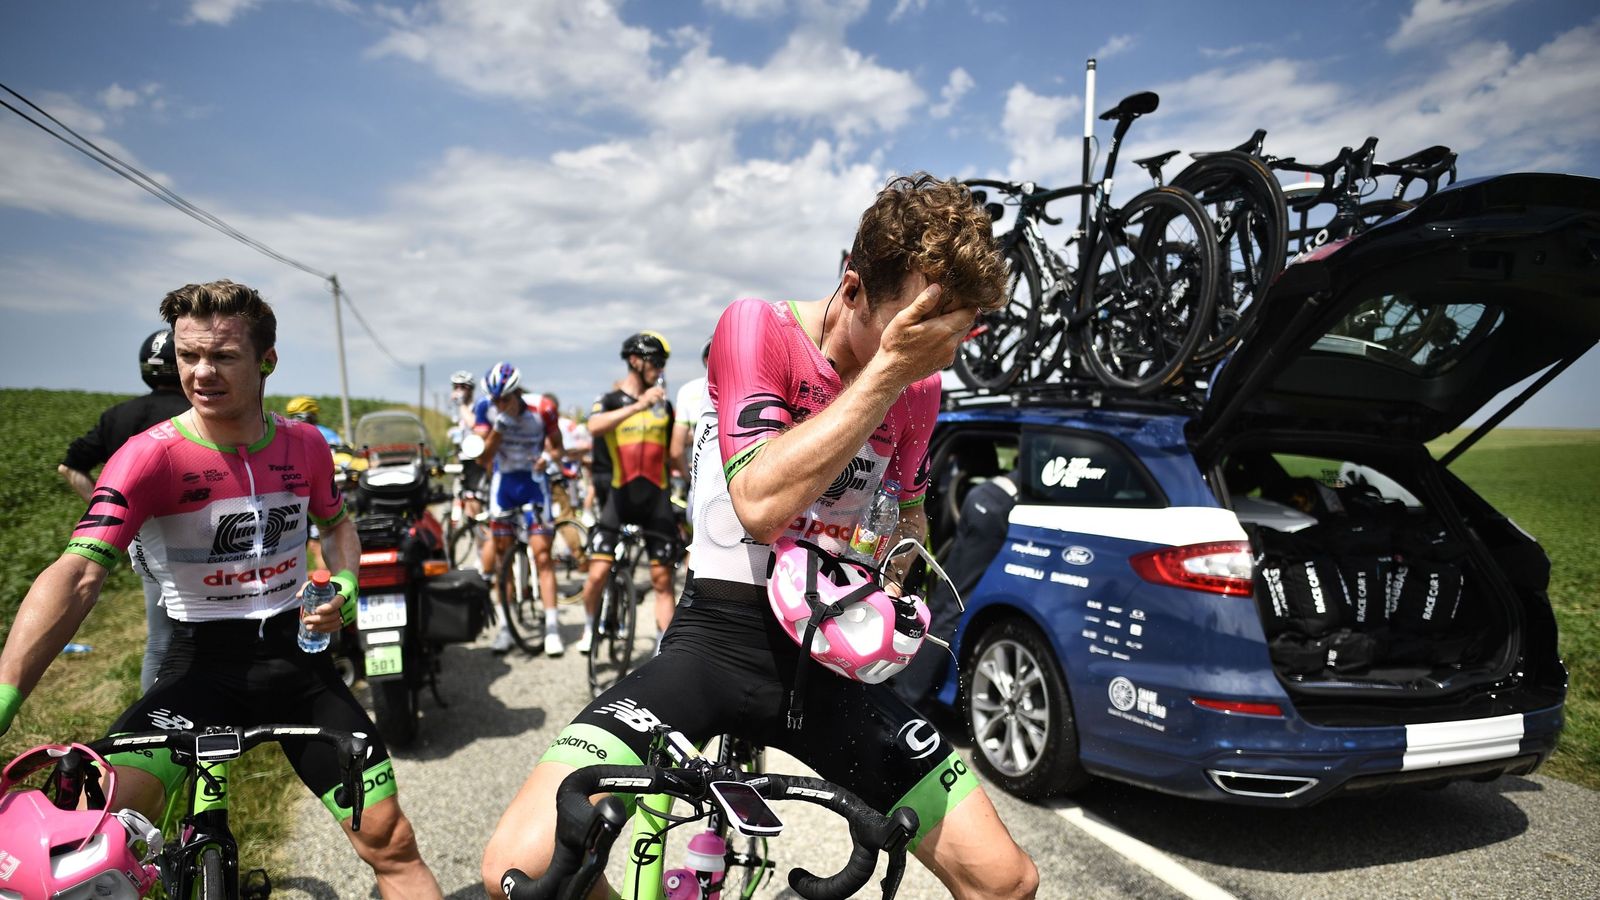 Tour de France briefly halted by protest as riders hit with pepper